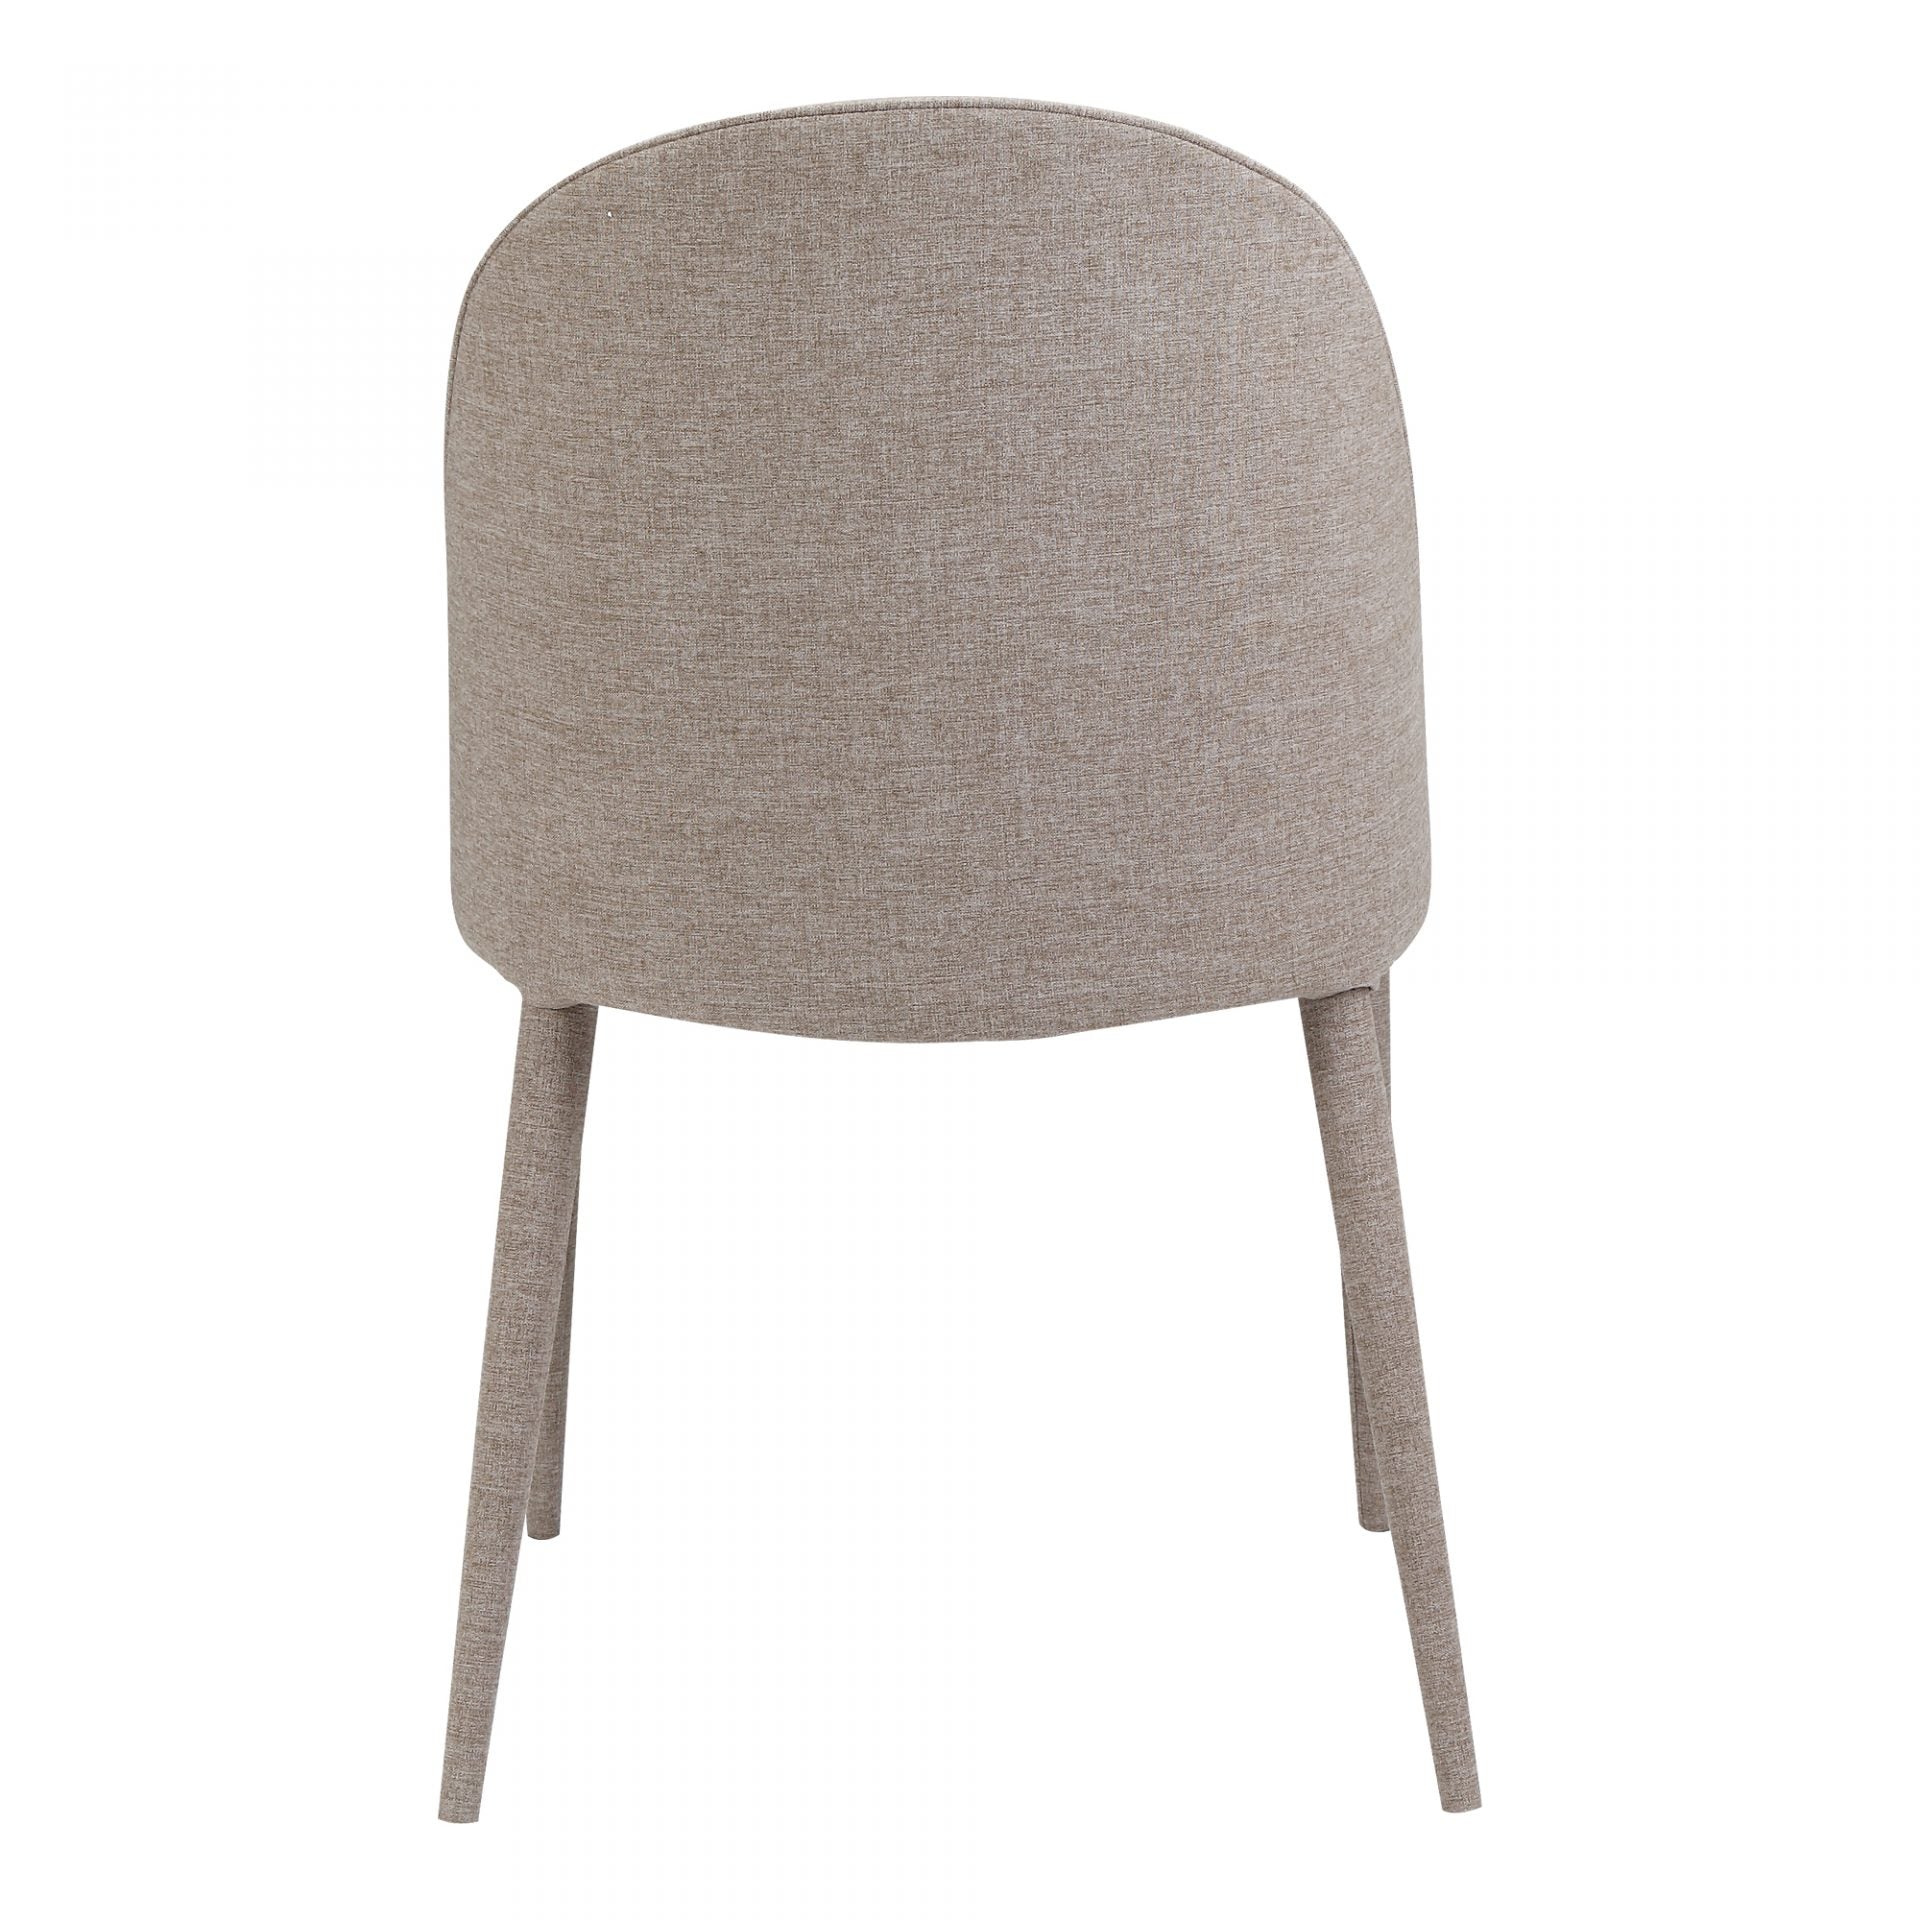 The slim legs of this Burton Light Grey Fabric Dining Chair give it a contemporary modern design. The foam cushion makes this an extremely comfortable and attractive dining chair.   Size: 19"W x 22"D x 33"H Seat Height: 18" Materials: Upholstery 100% Polyester, Iron Frame, Plywood, Foam